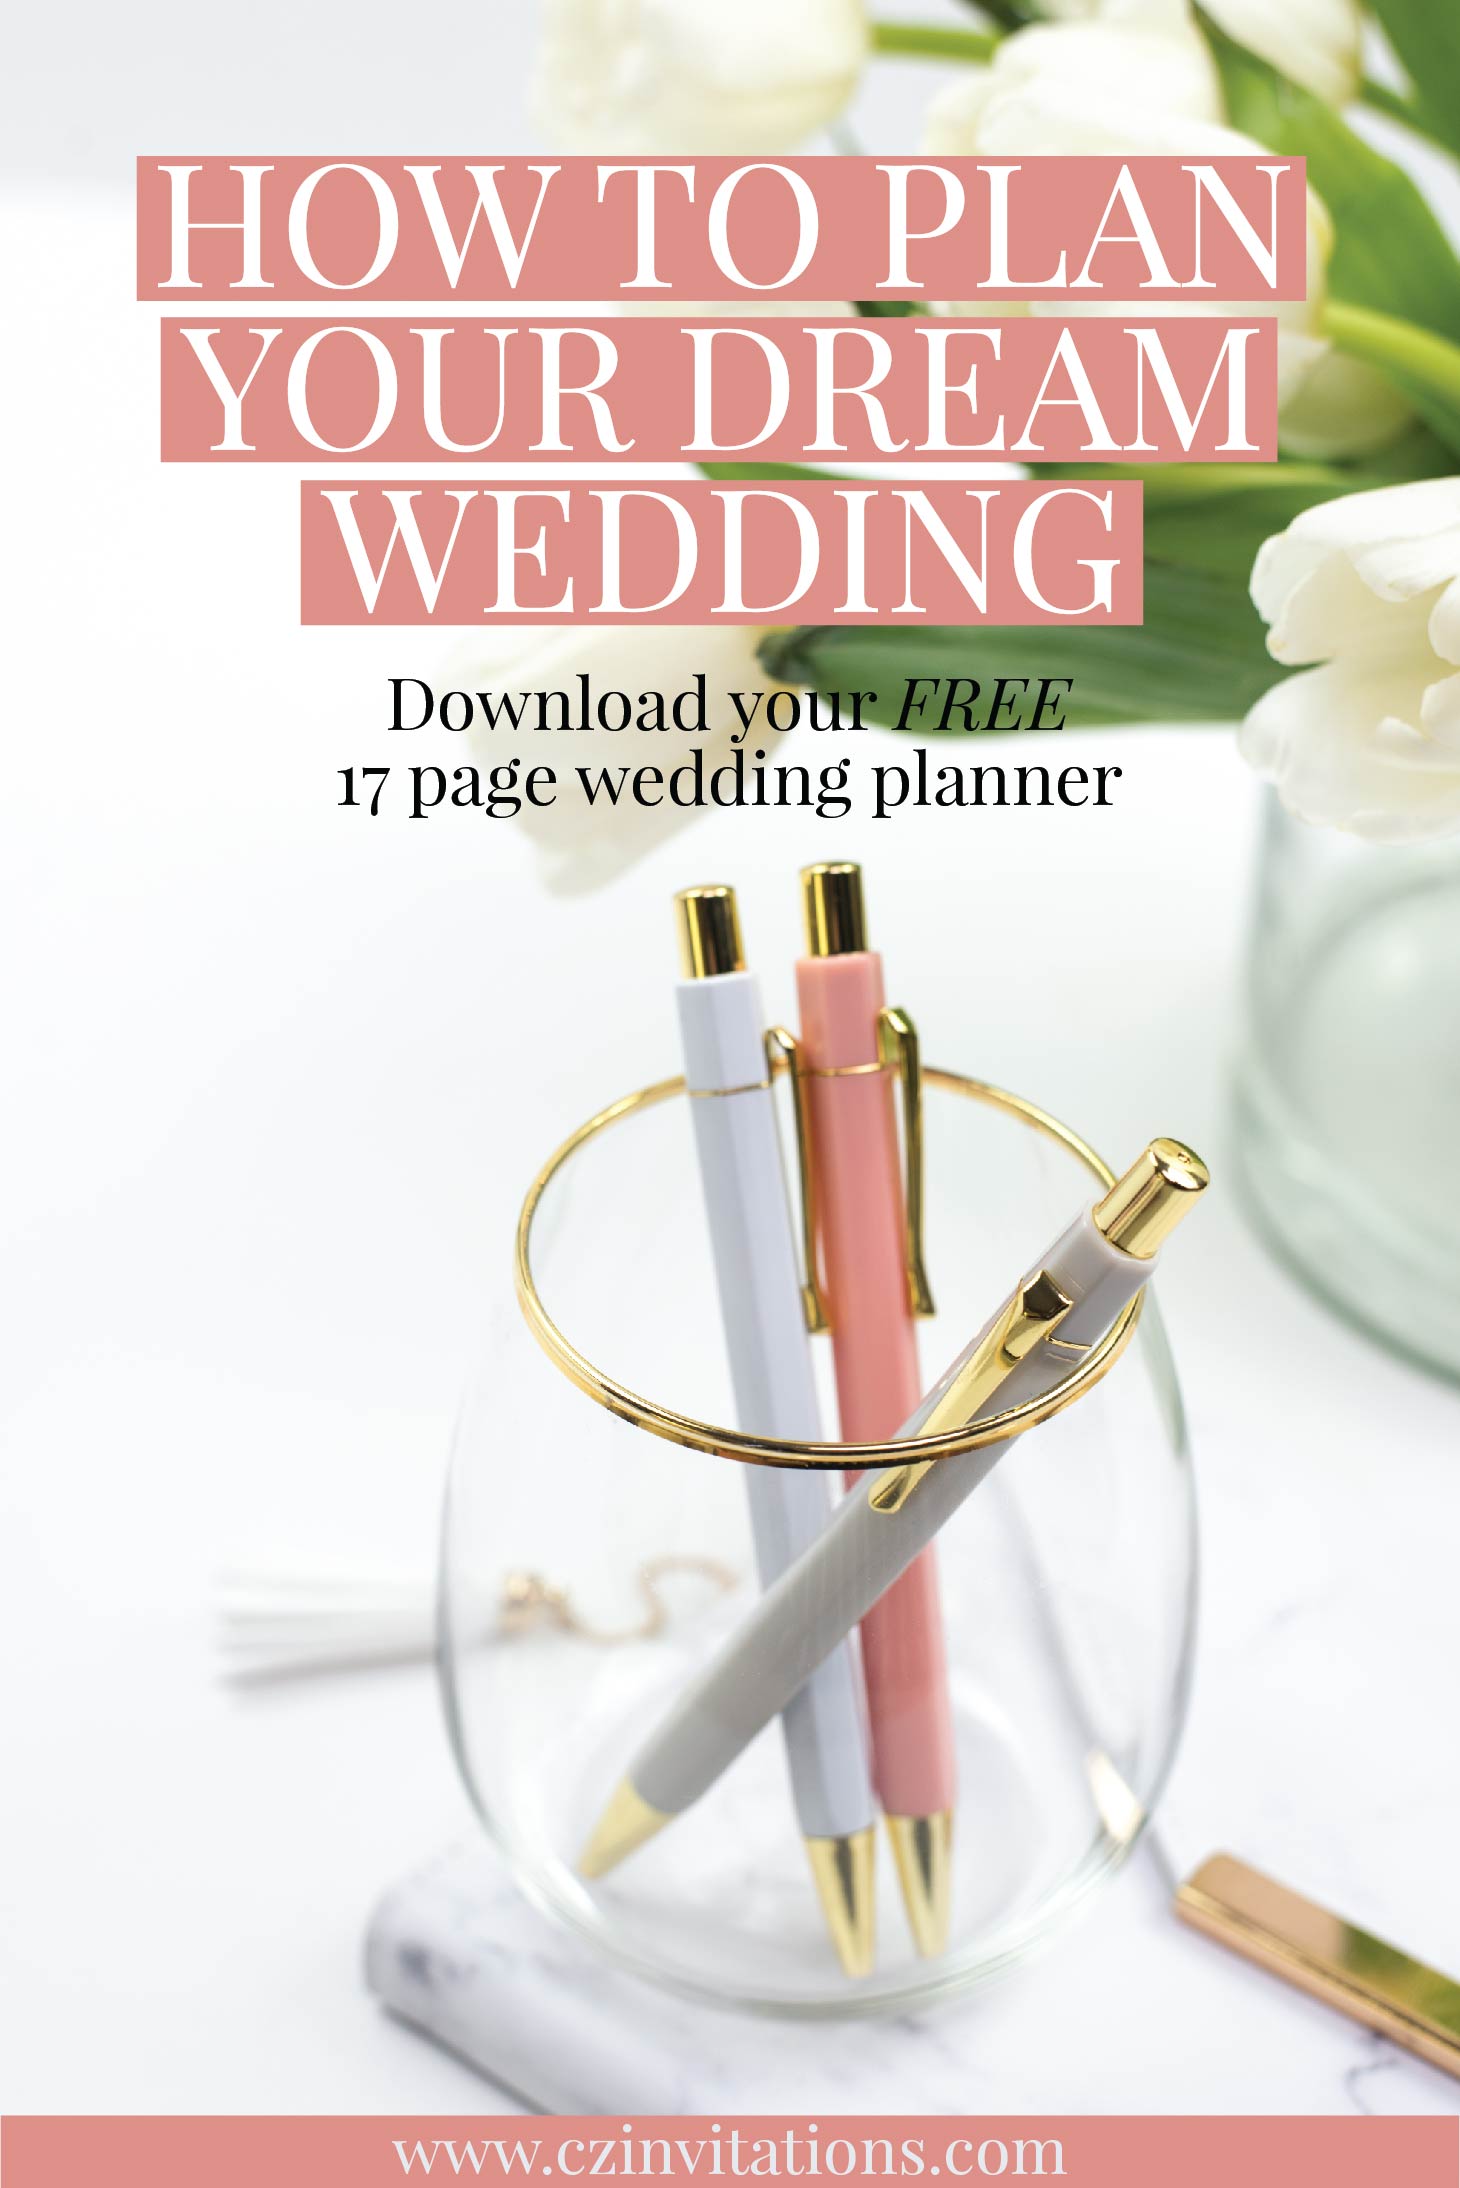 How-to-plan-your-dream-wedding-01.jpg